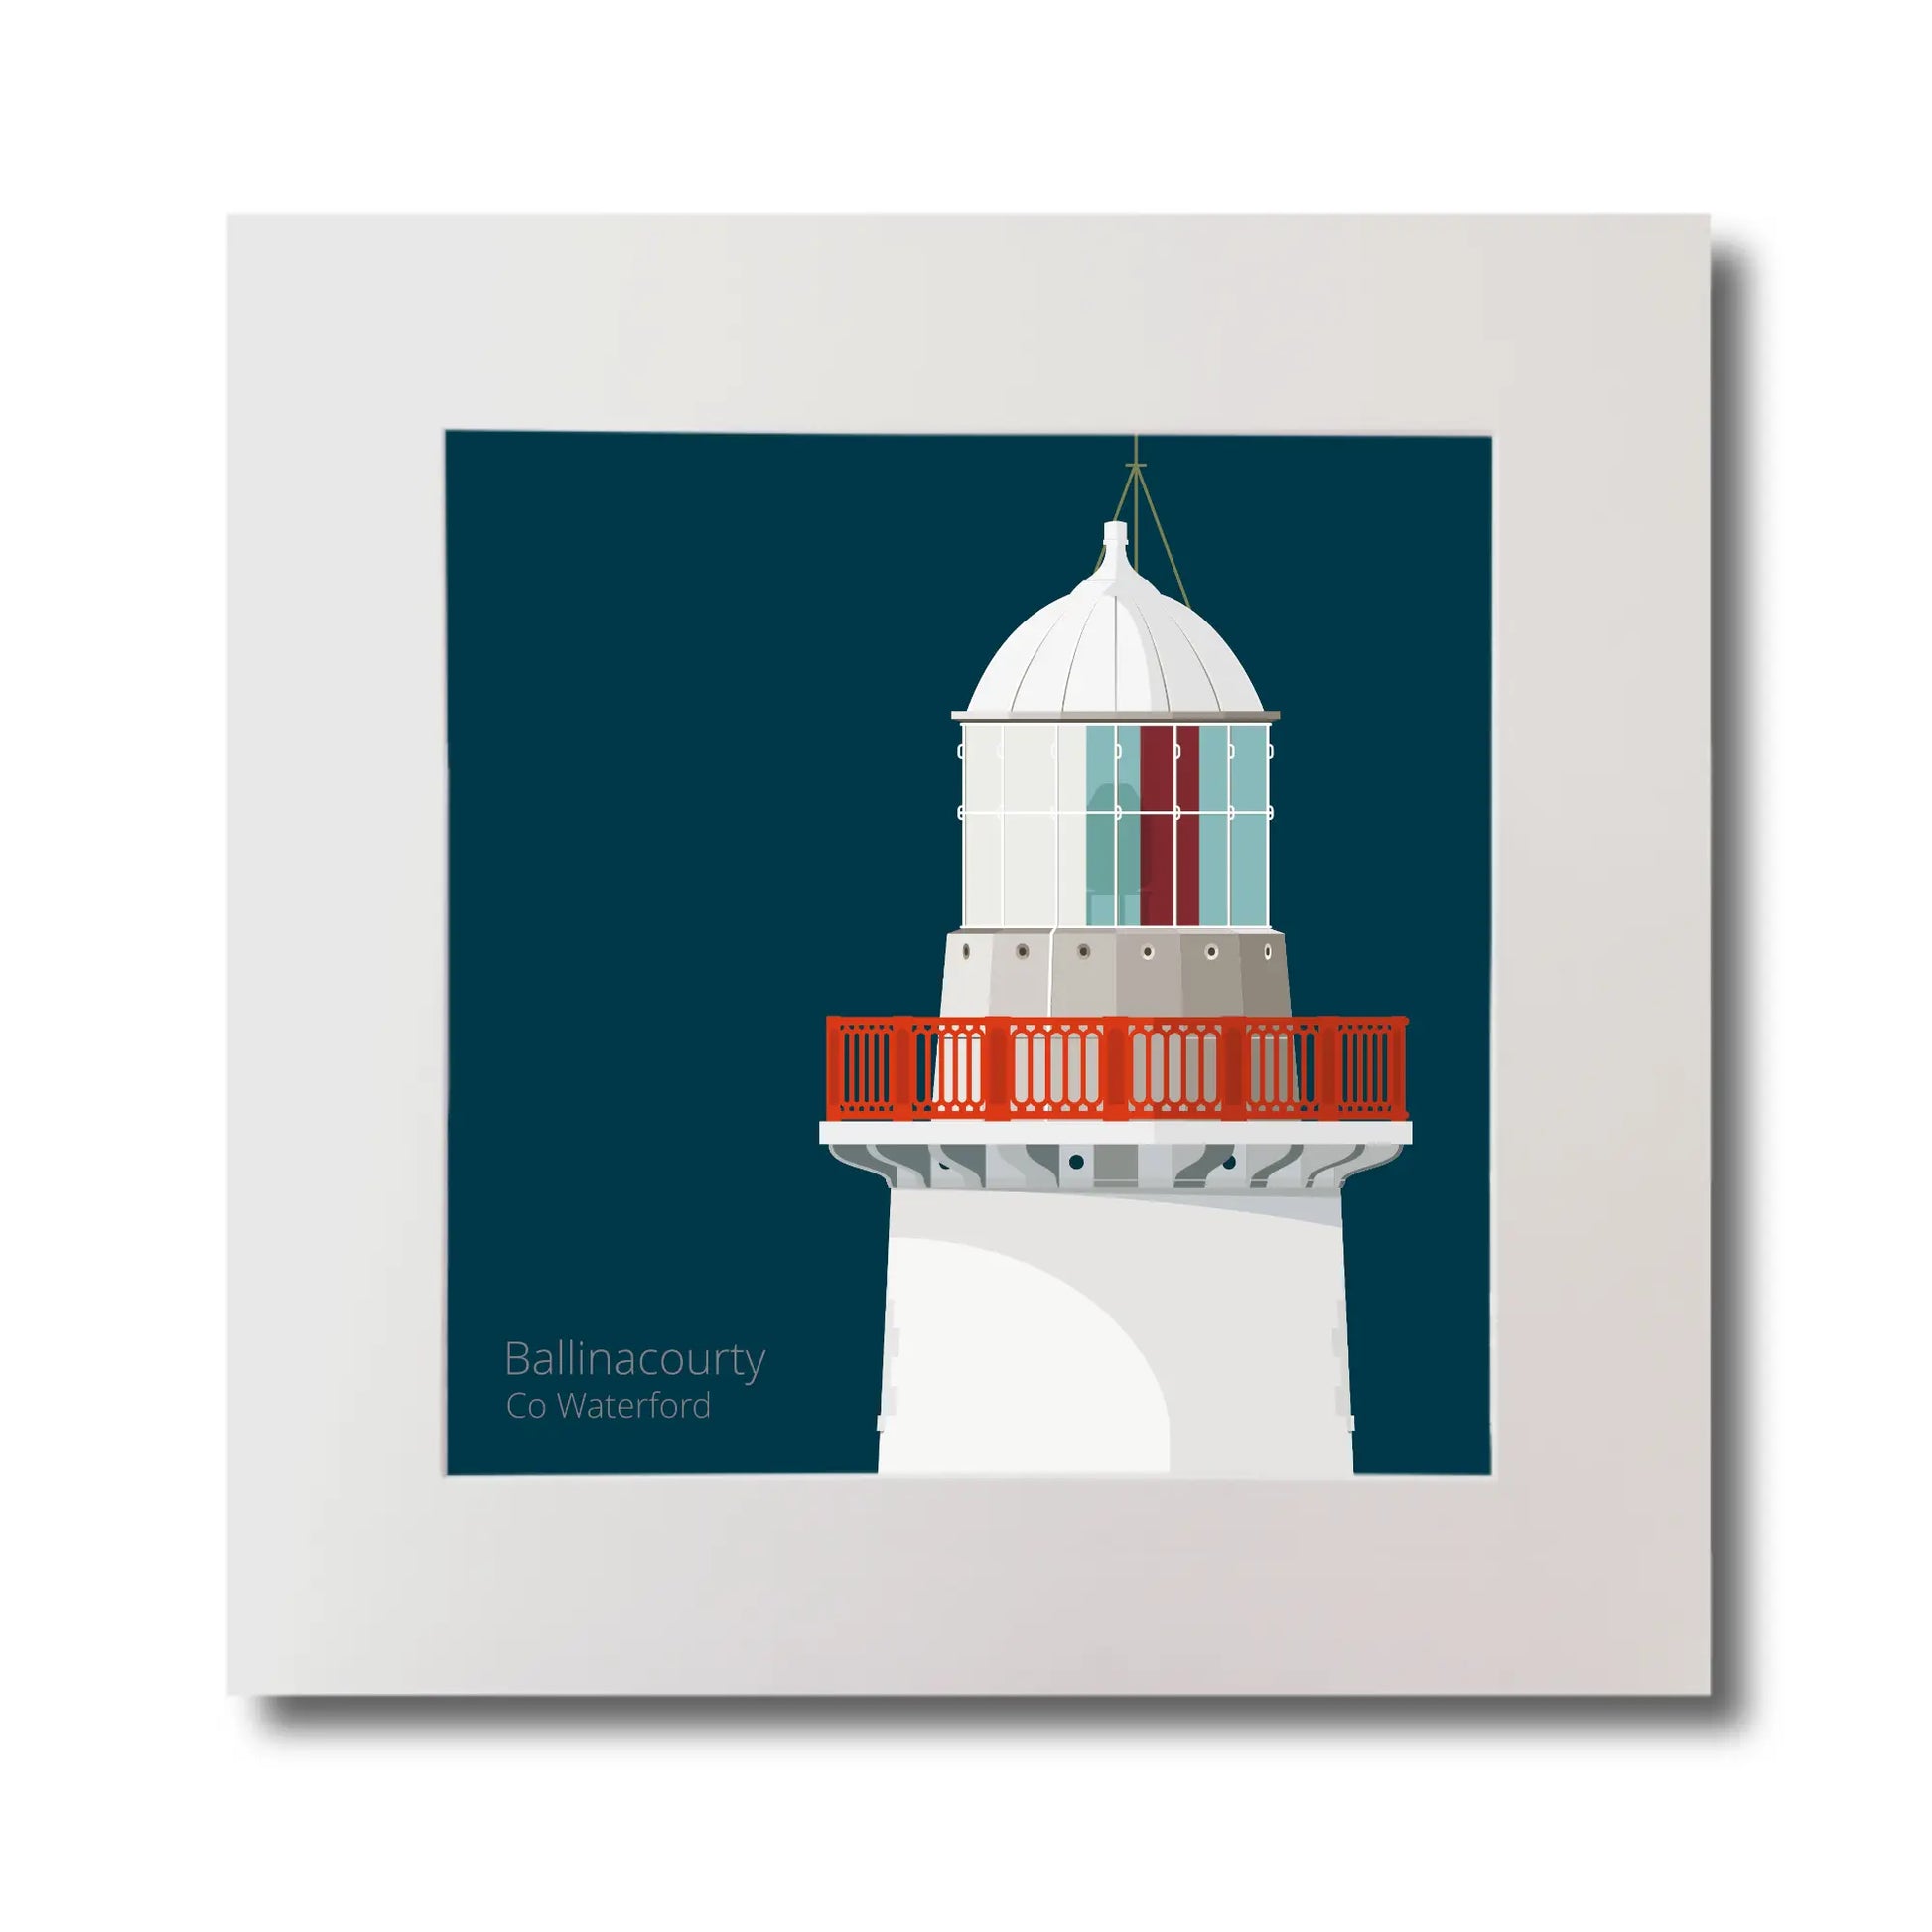 Illustration of Ballinacourty lighthouse on a midnight blue background, mounted and measuring 30x30cm.